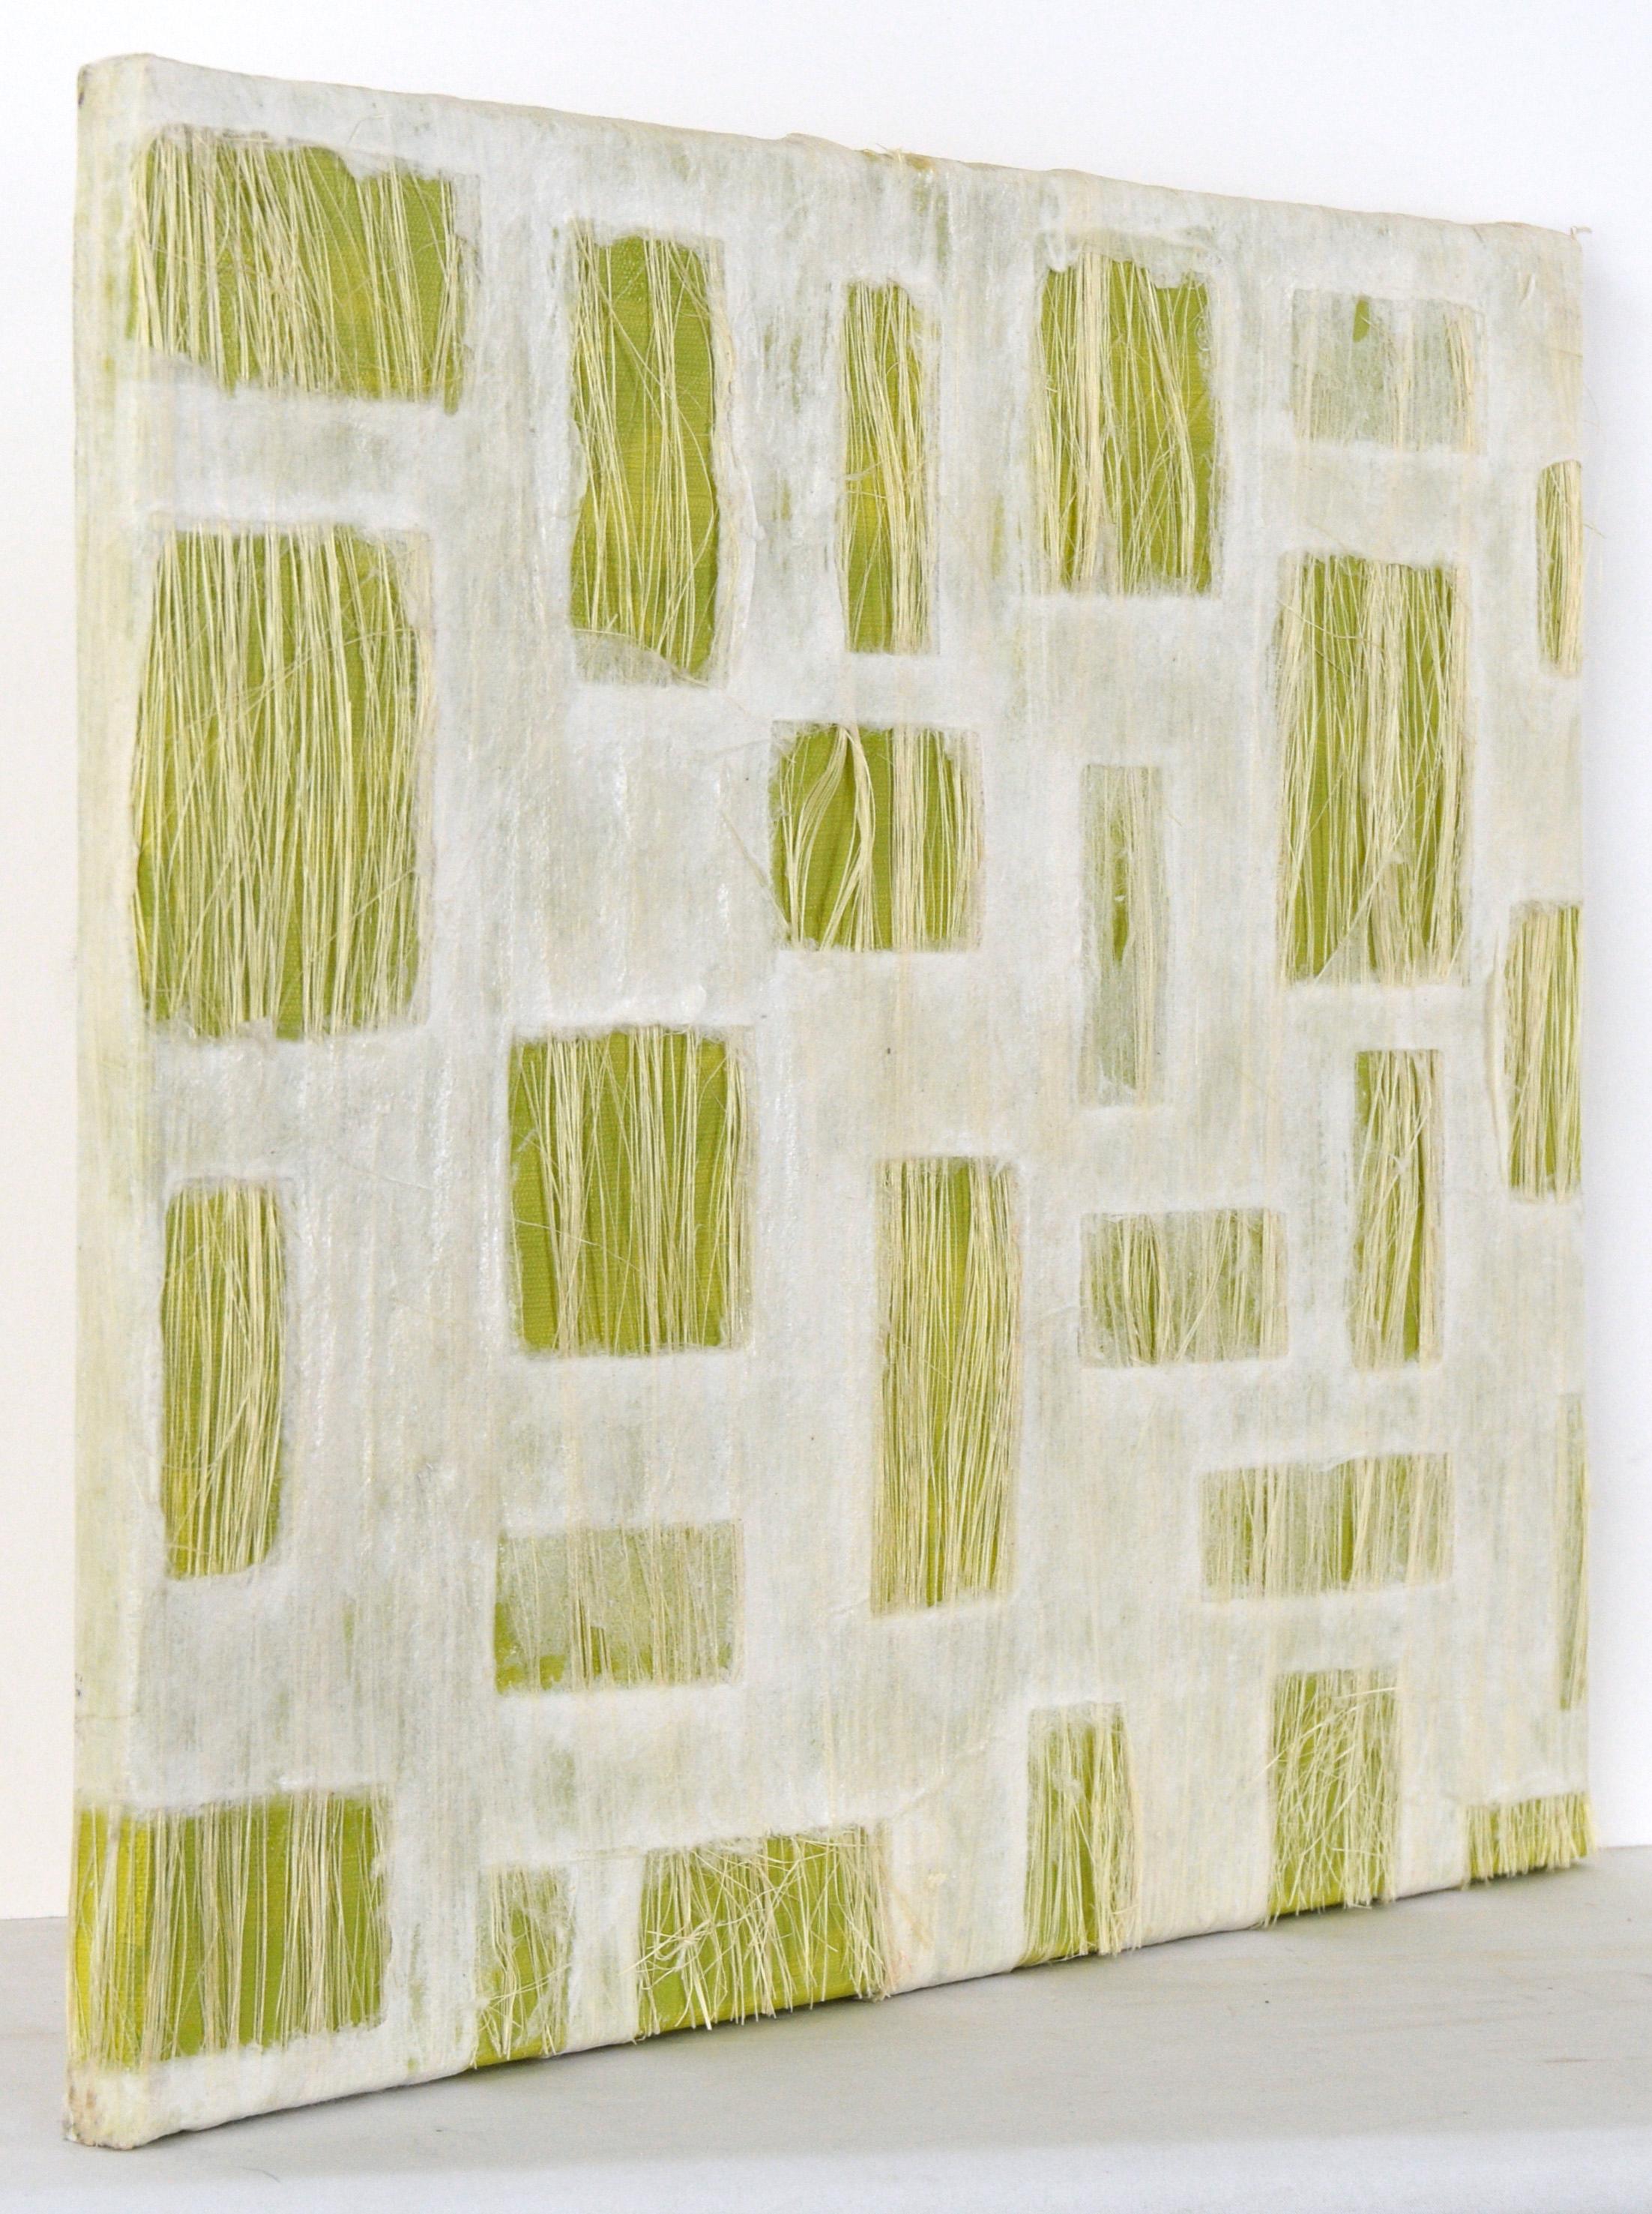 Abstract Geometric Composition with Paper, Fibers, and Acrylic on Canvas (Green) For Sale 3